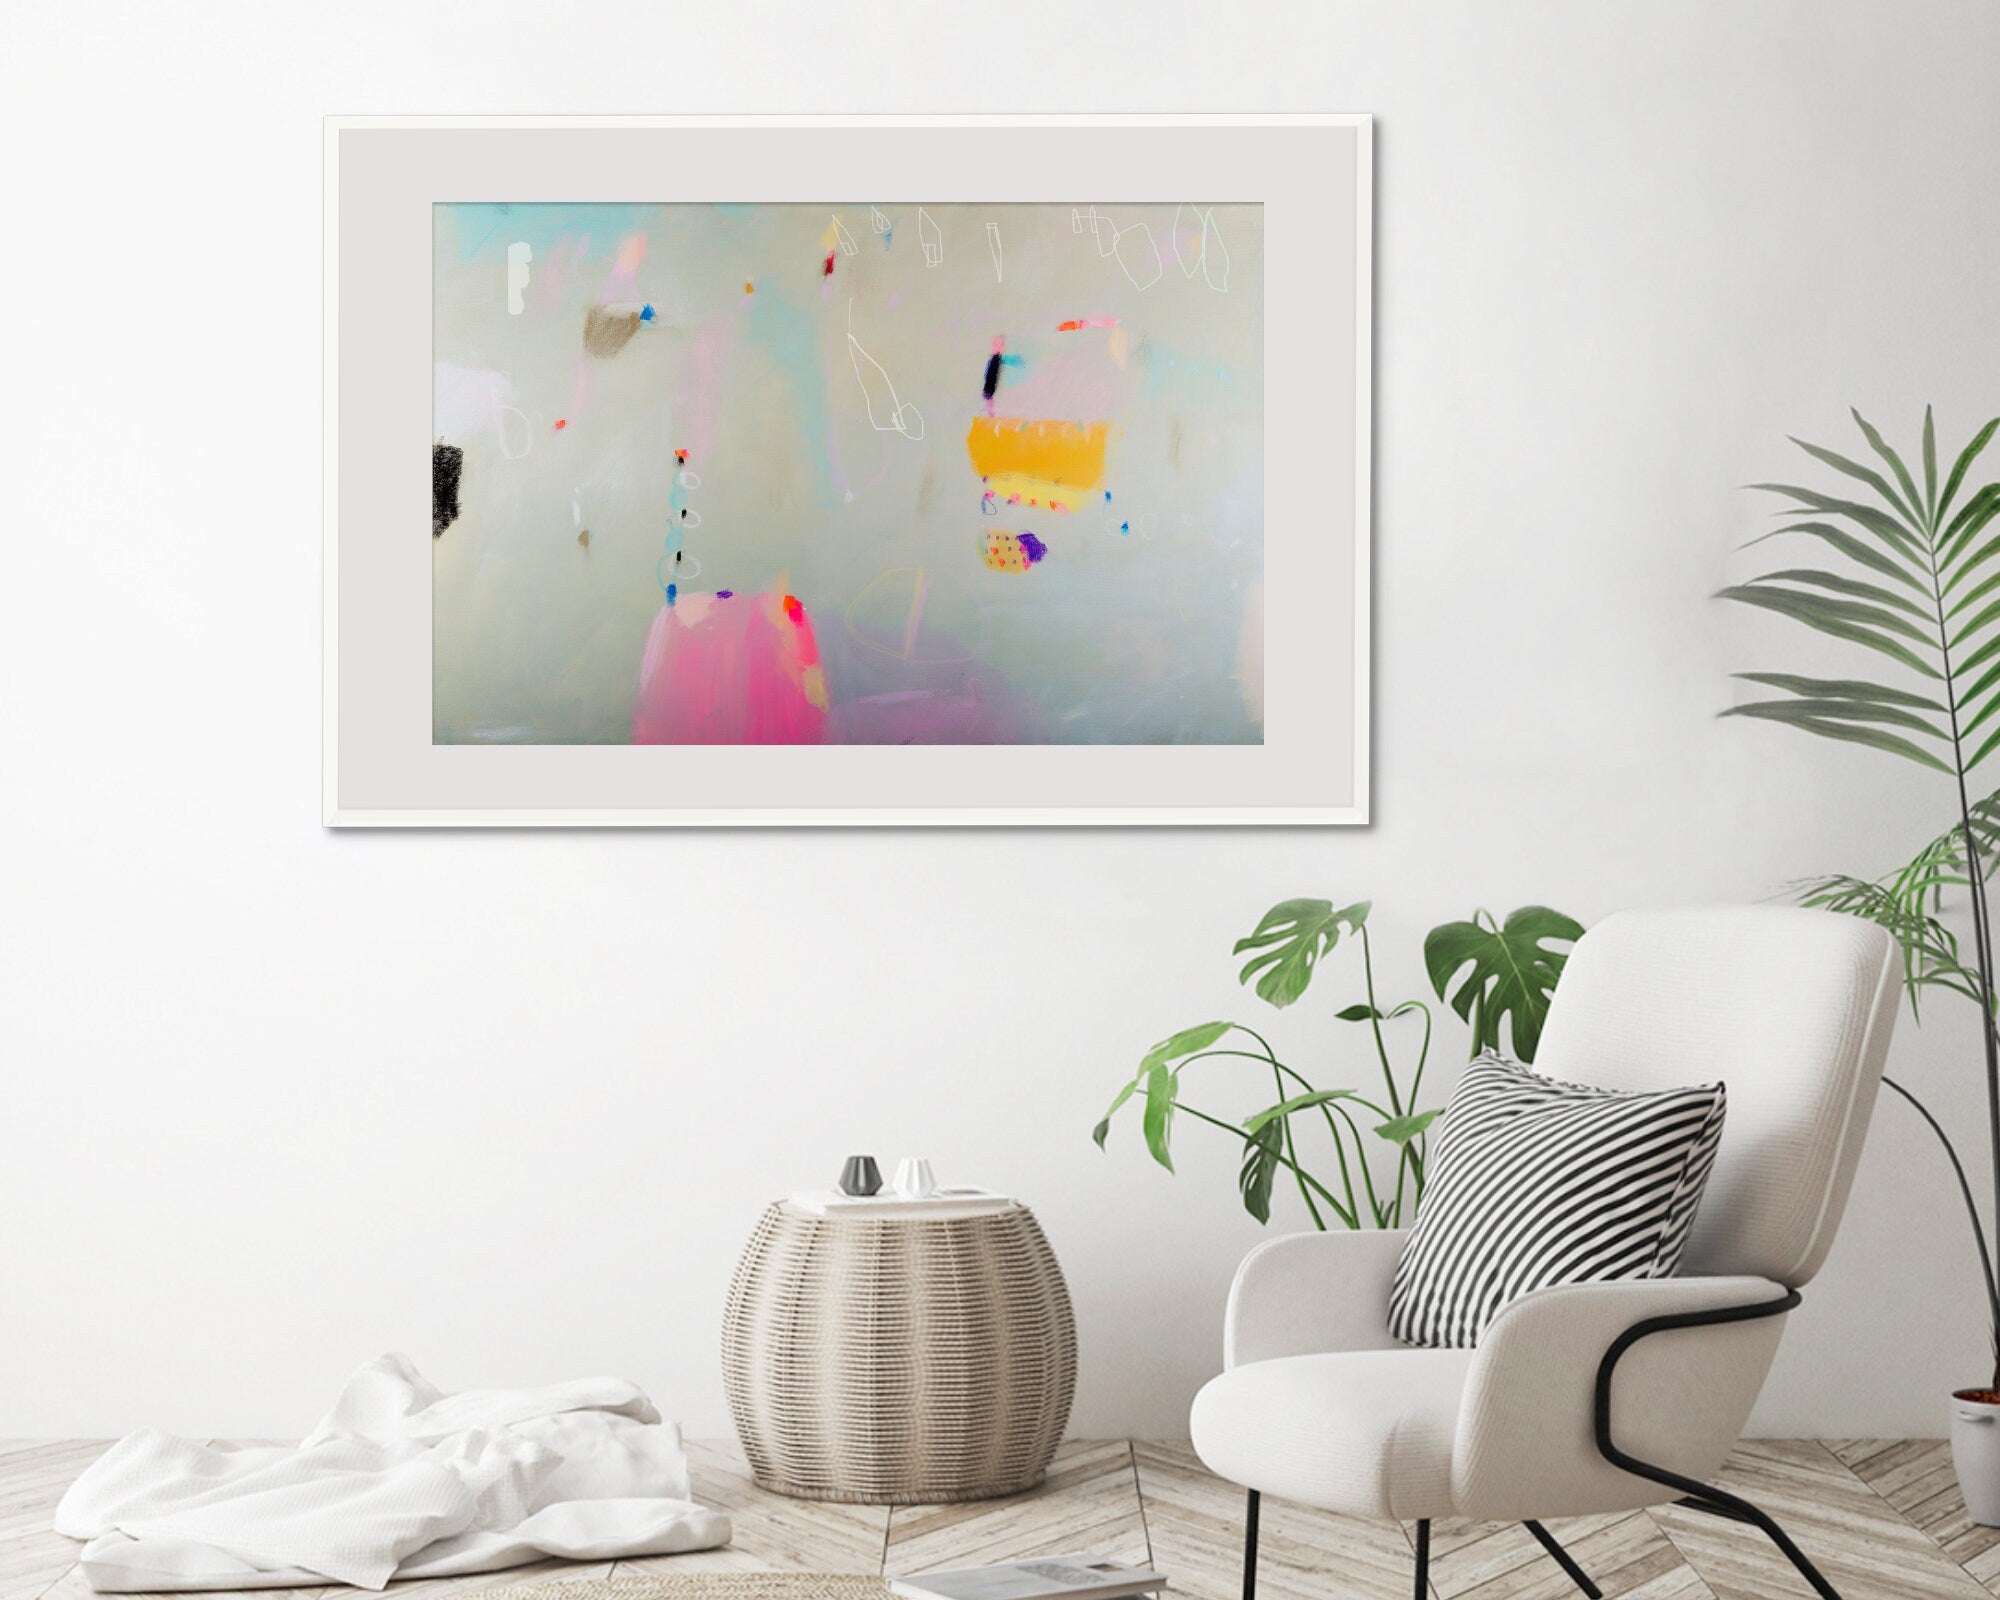 LARGE ABSTRACT ART painting print, Large modern wall art , colorful painting, acrylic abstract painting by Camilo Mattis